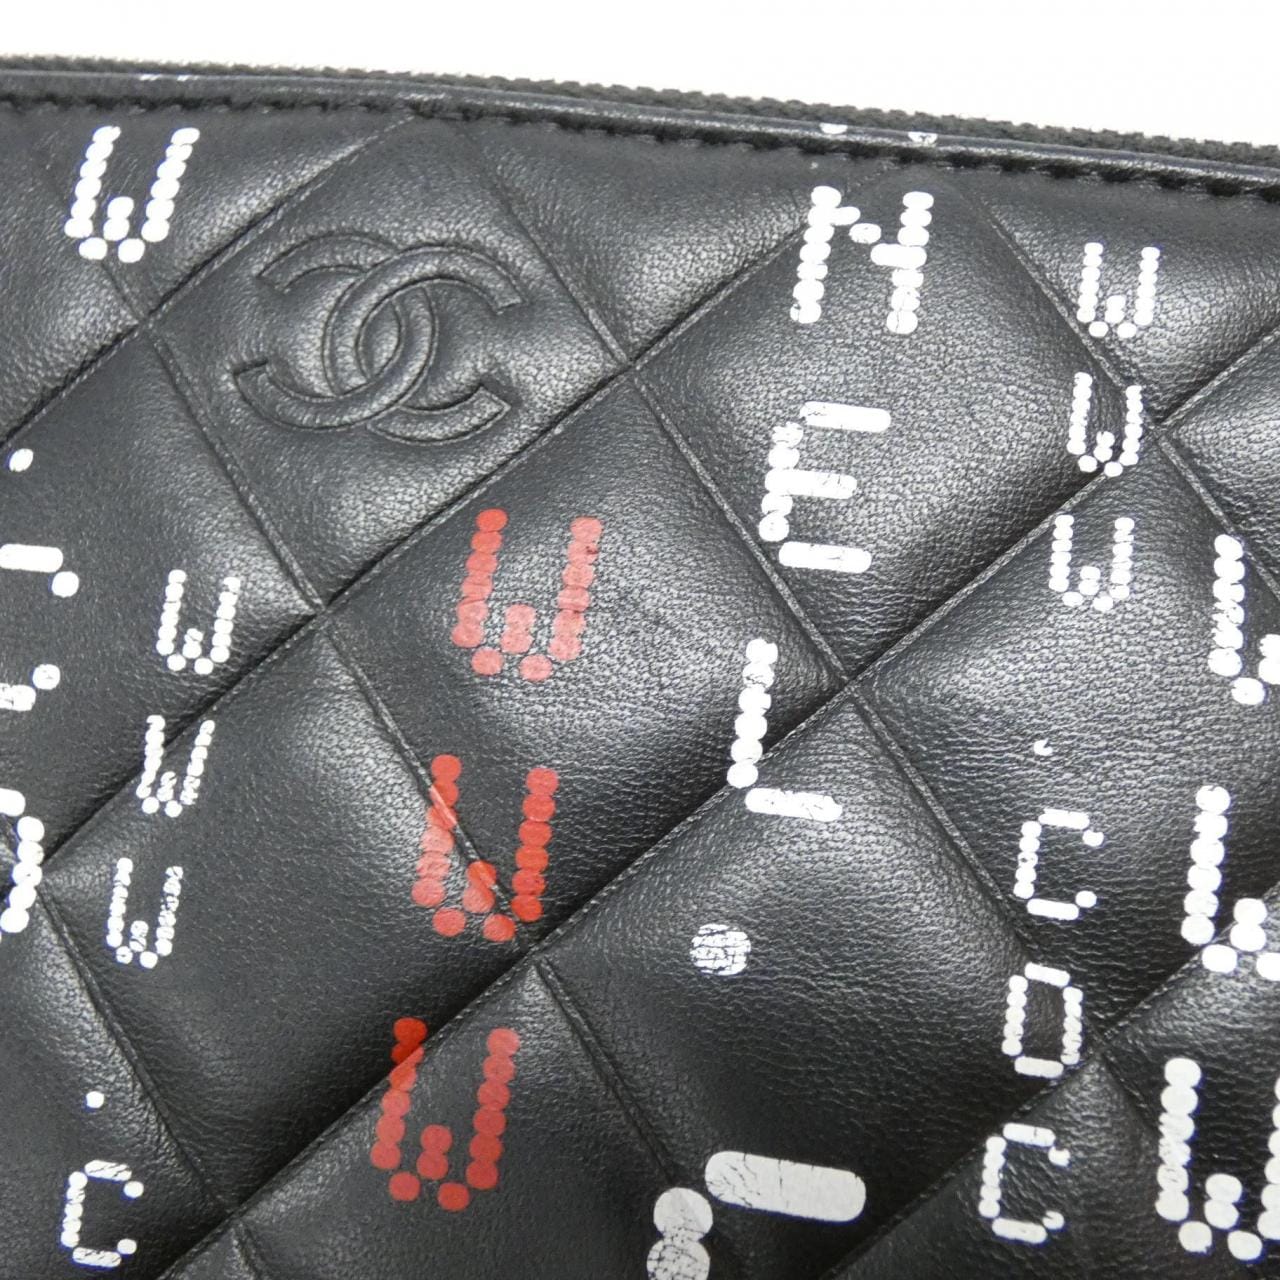 CHANEL pouch